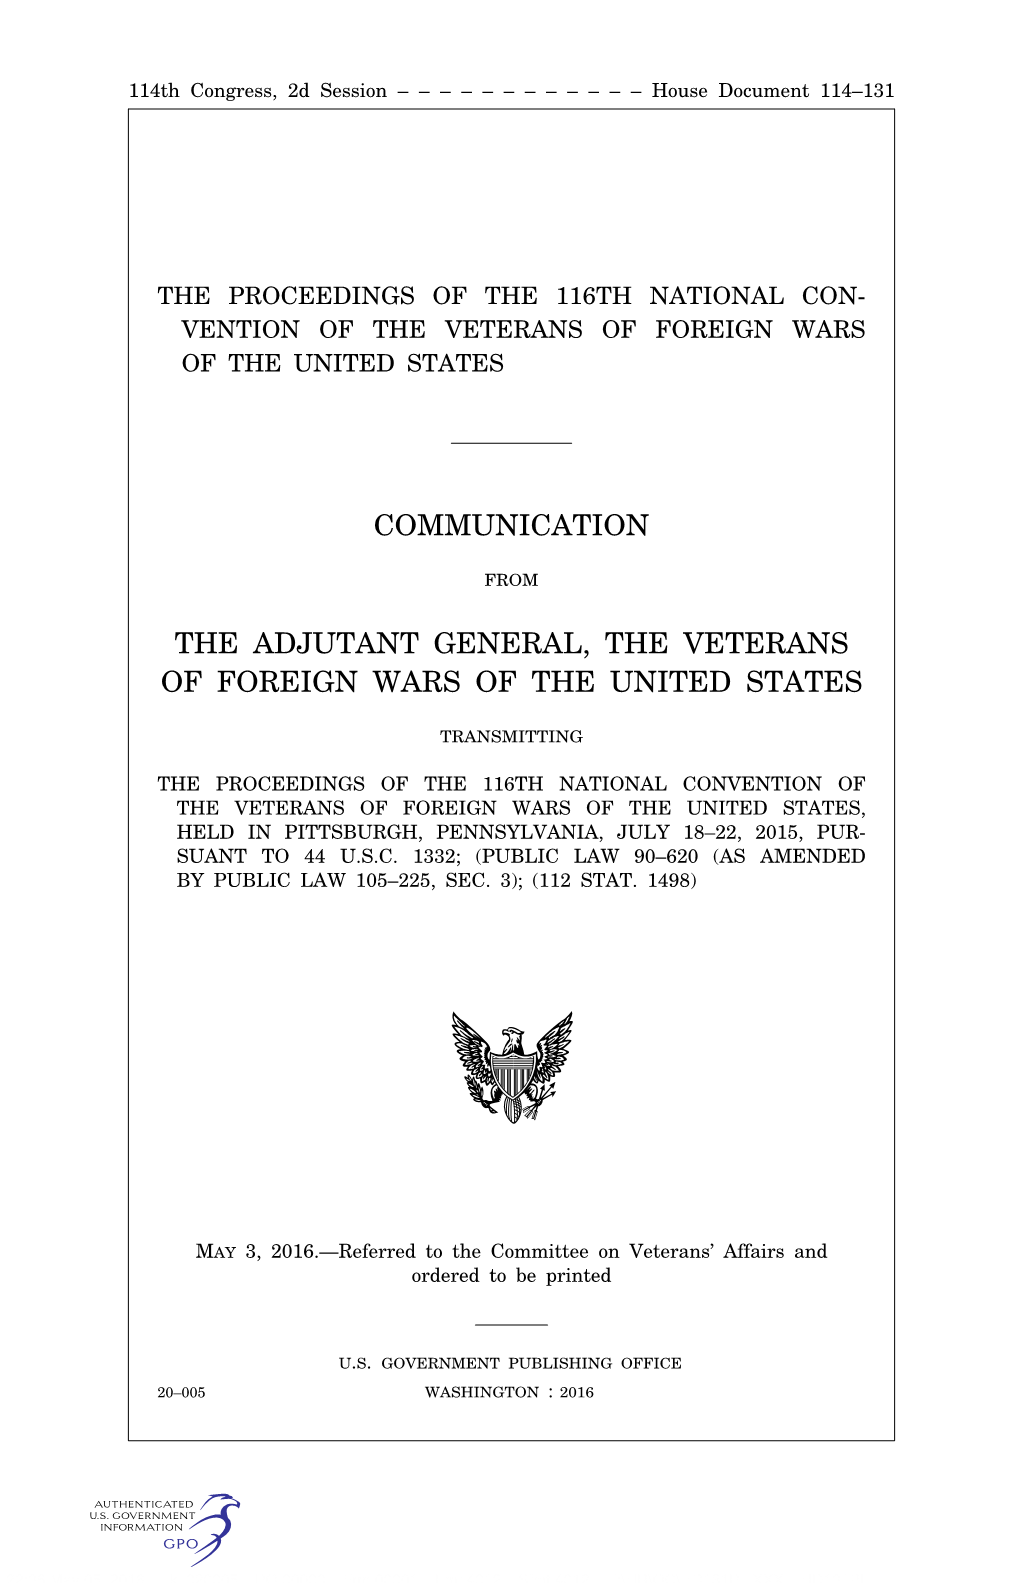 Vention of the Veterans of Foreign Wars of the United States